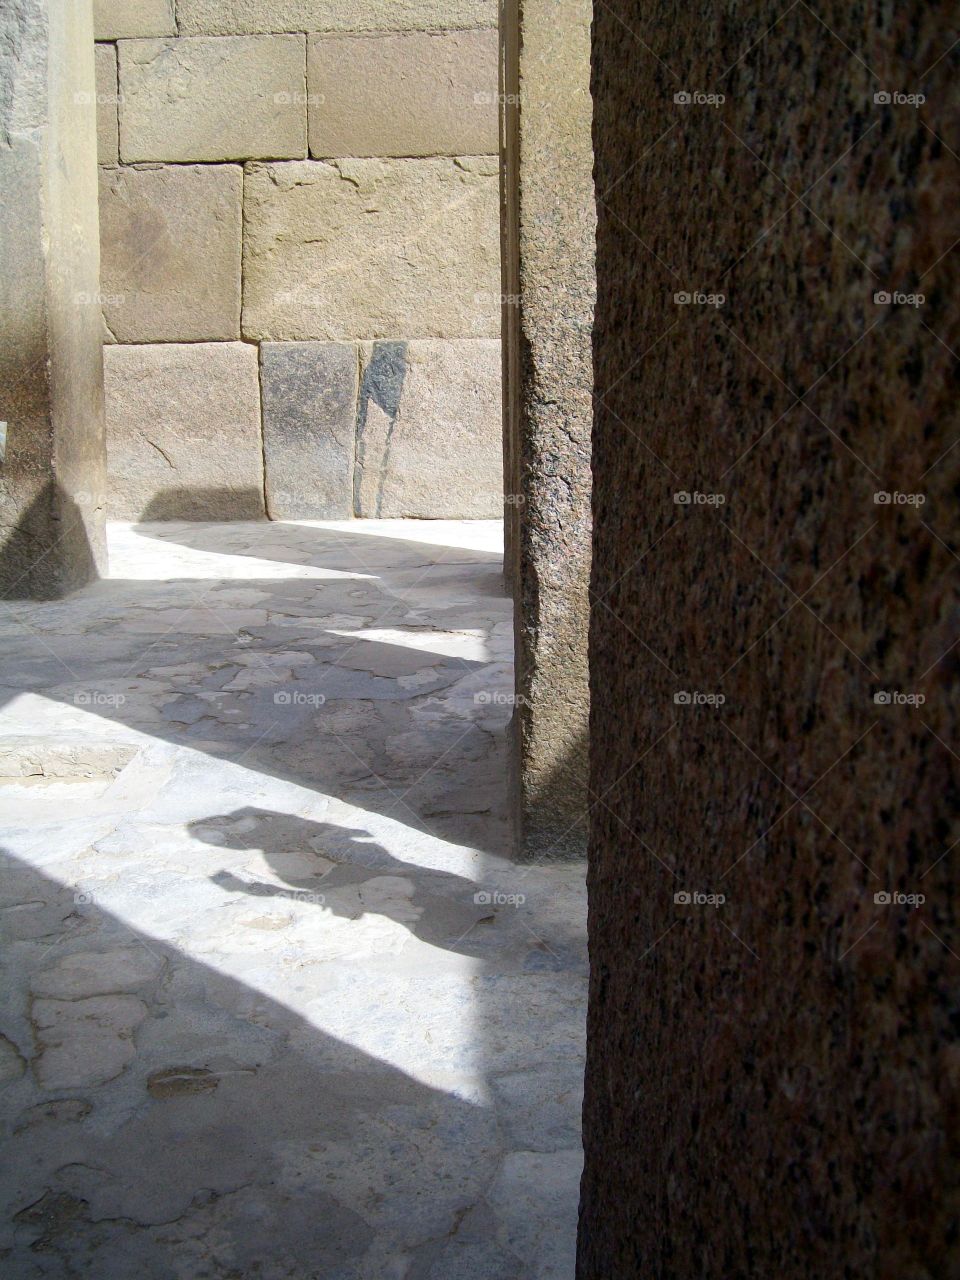 A timely photo of a shadow in Egyptian ruins